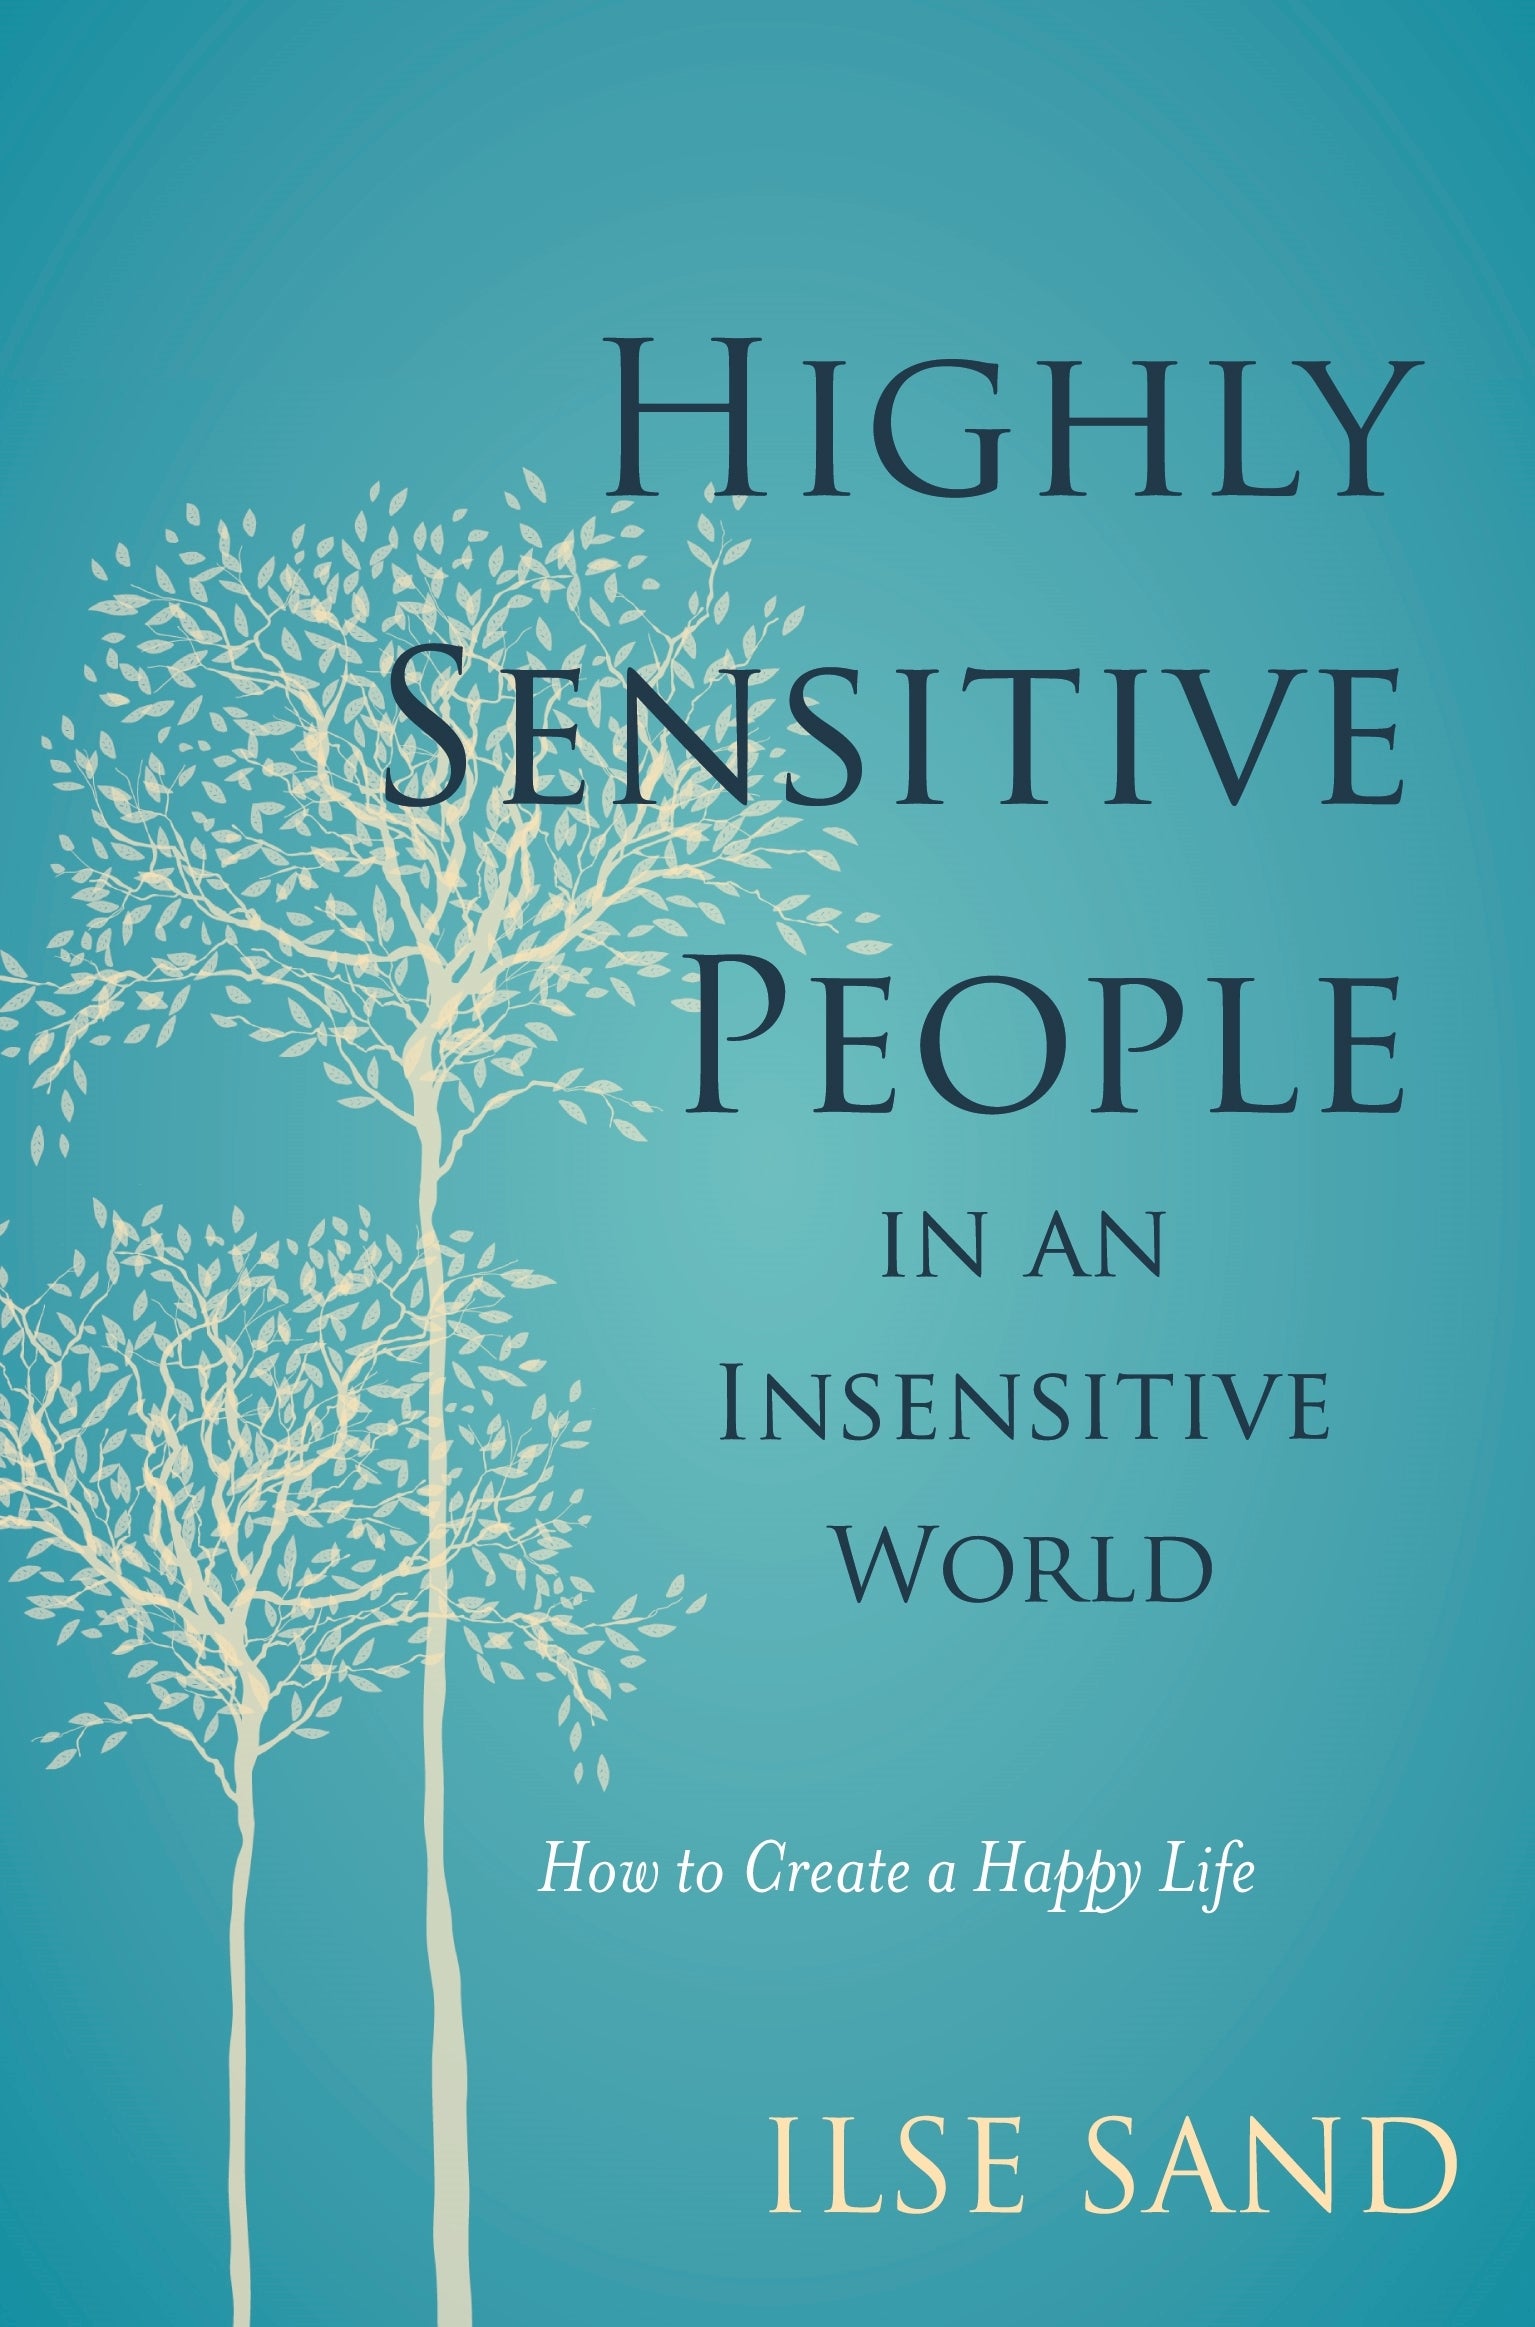 Highly Sensitive People in an Insensitive World by Ilse Sand